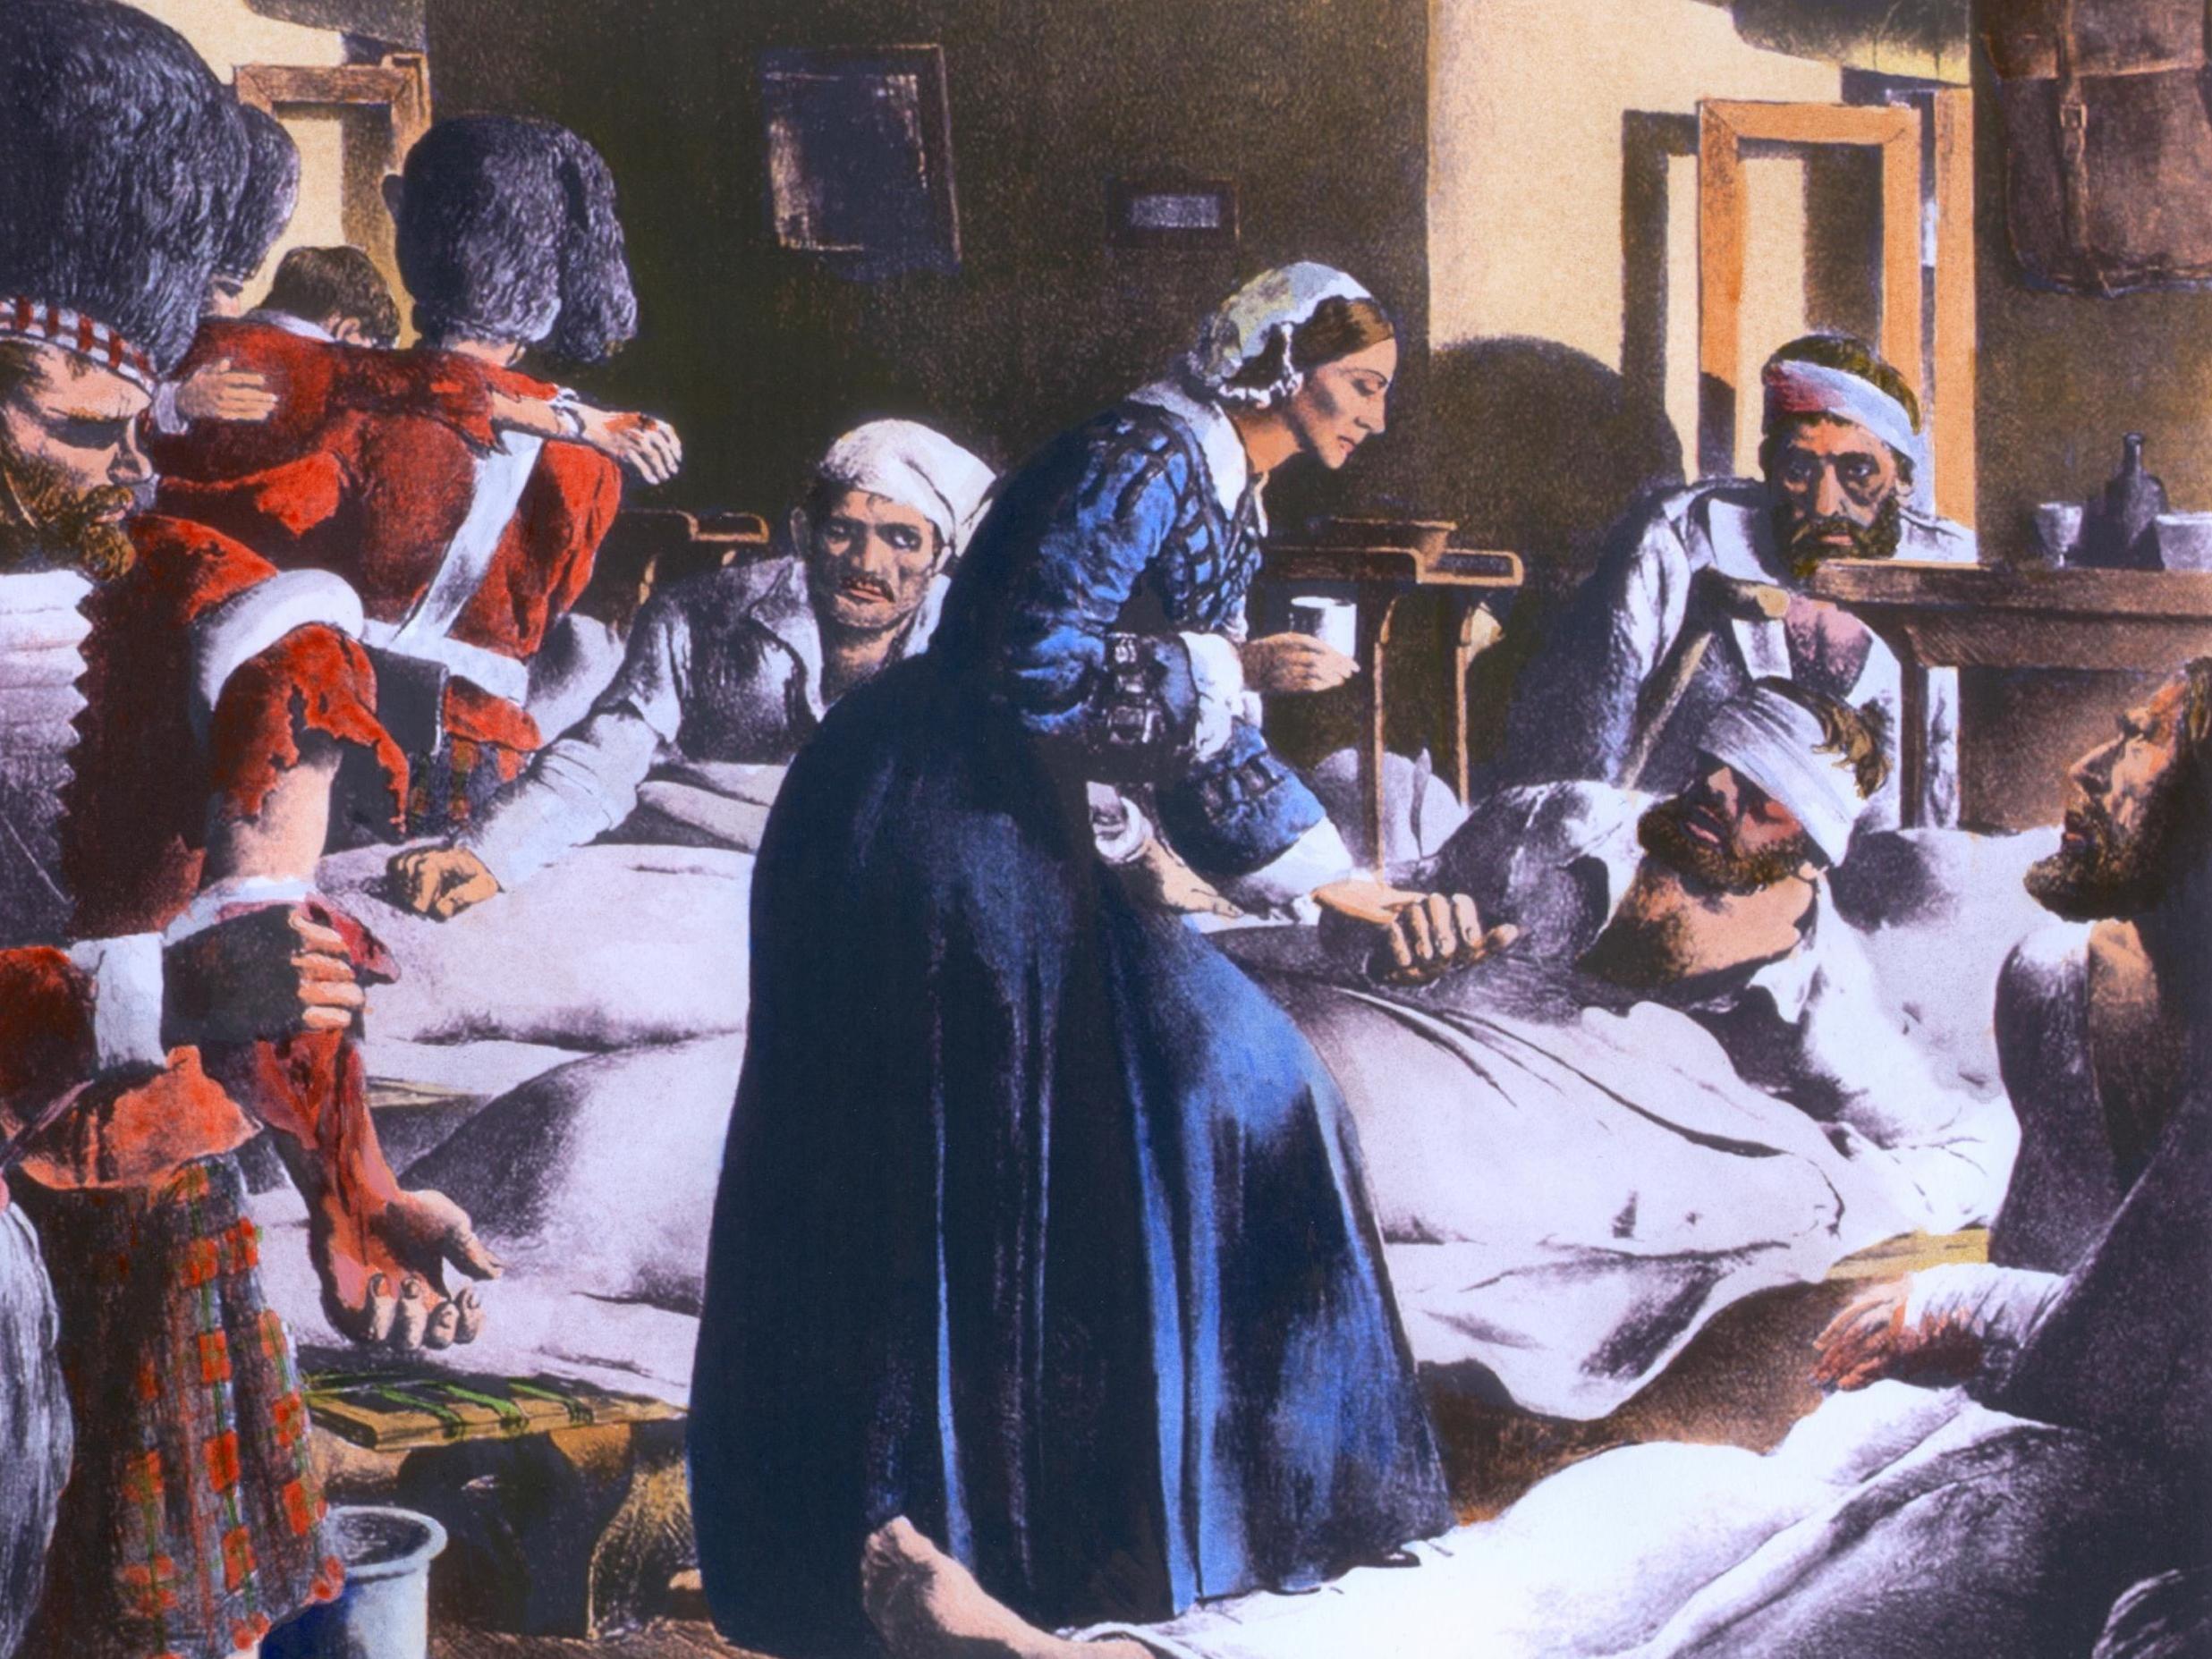 Florence Nightingale 1820-1910 ministering to soldiers at Scutari a suburb of Istanbul during the Crimean War, Lithograph by Robert Riggs ca. 1930 with modern watercolor.